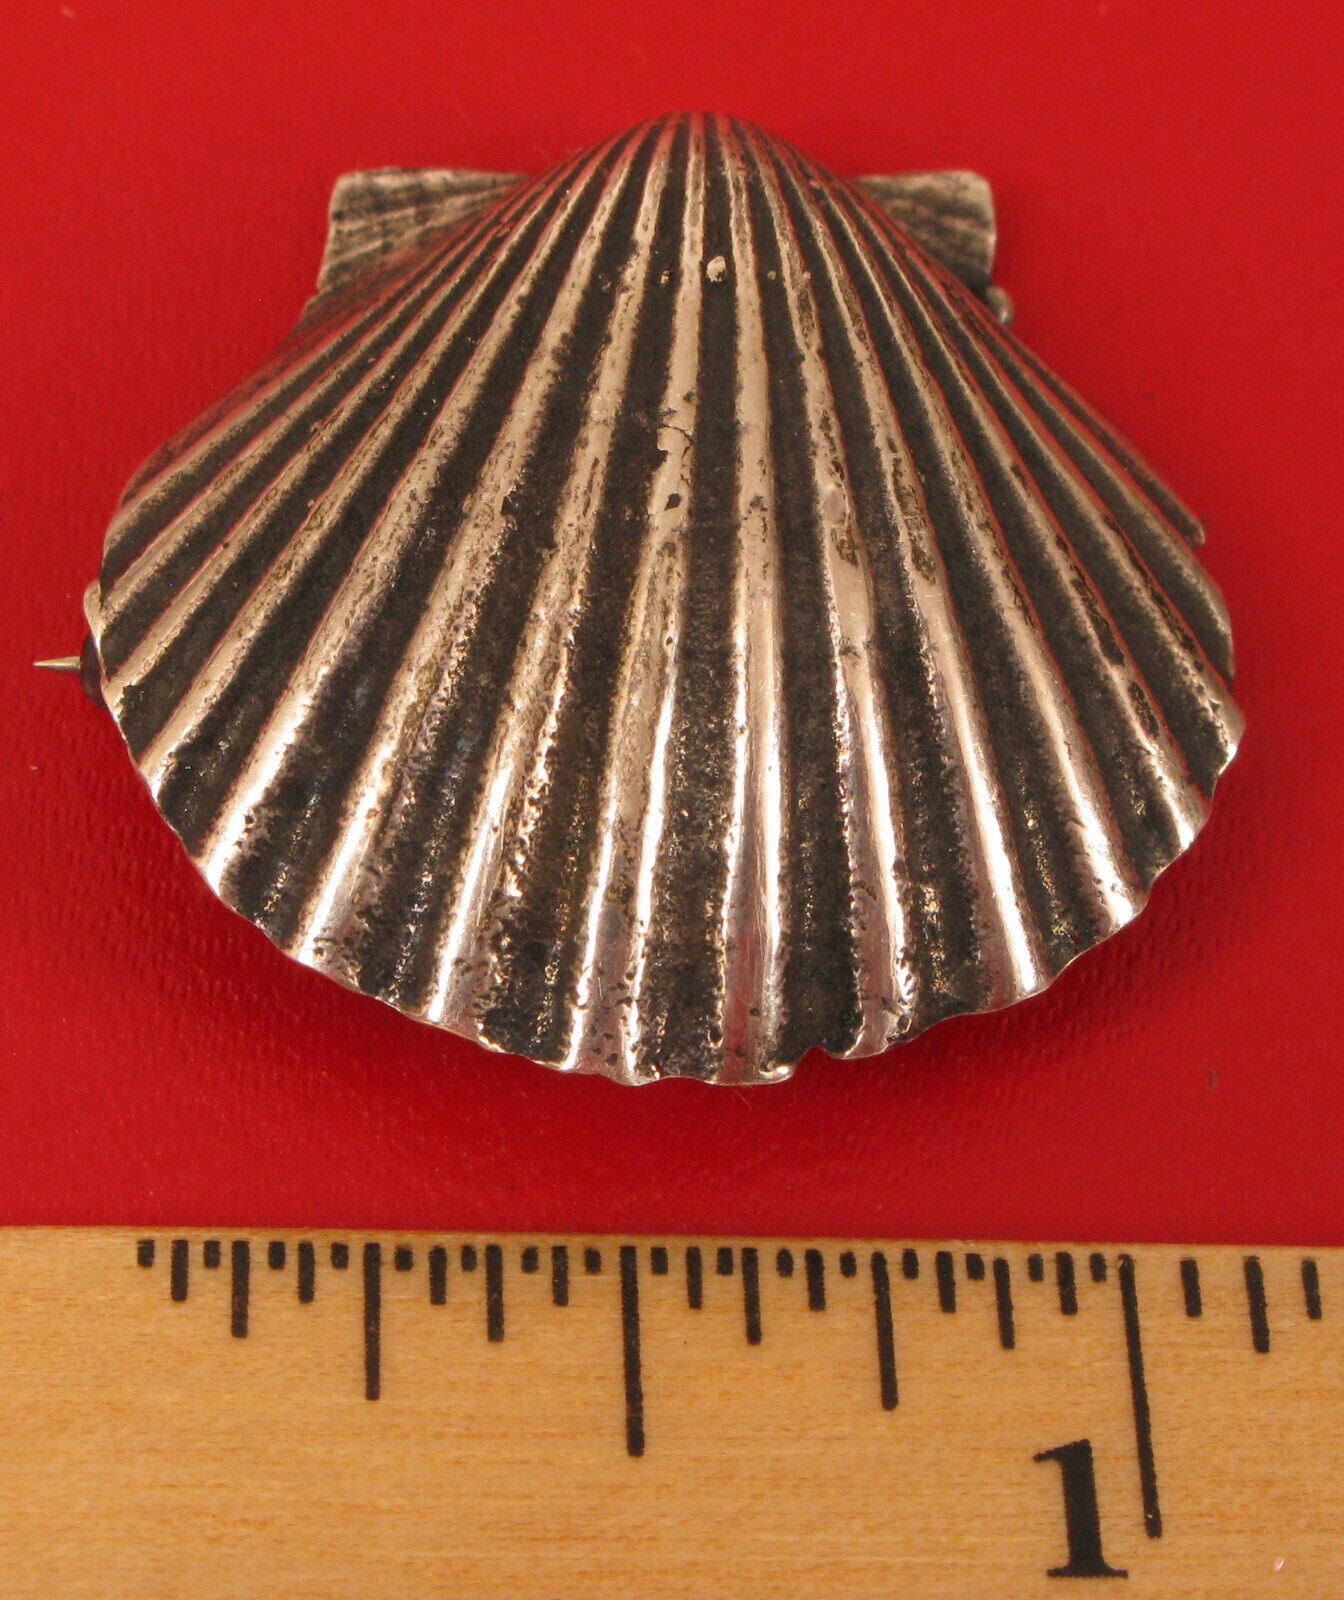 VINTAGE STERLING SILVER OCEAN NAUTICAL THEME SCALLOP CLAM SEASHELL BROOCH PIN 